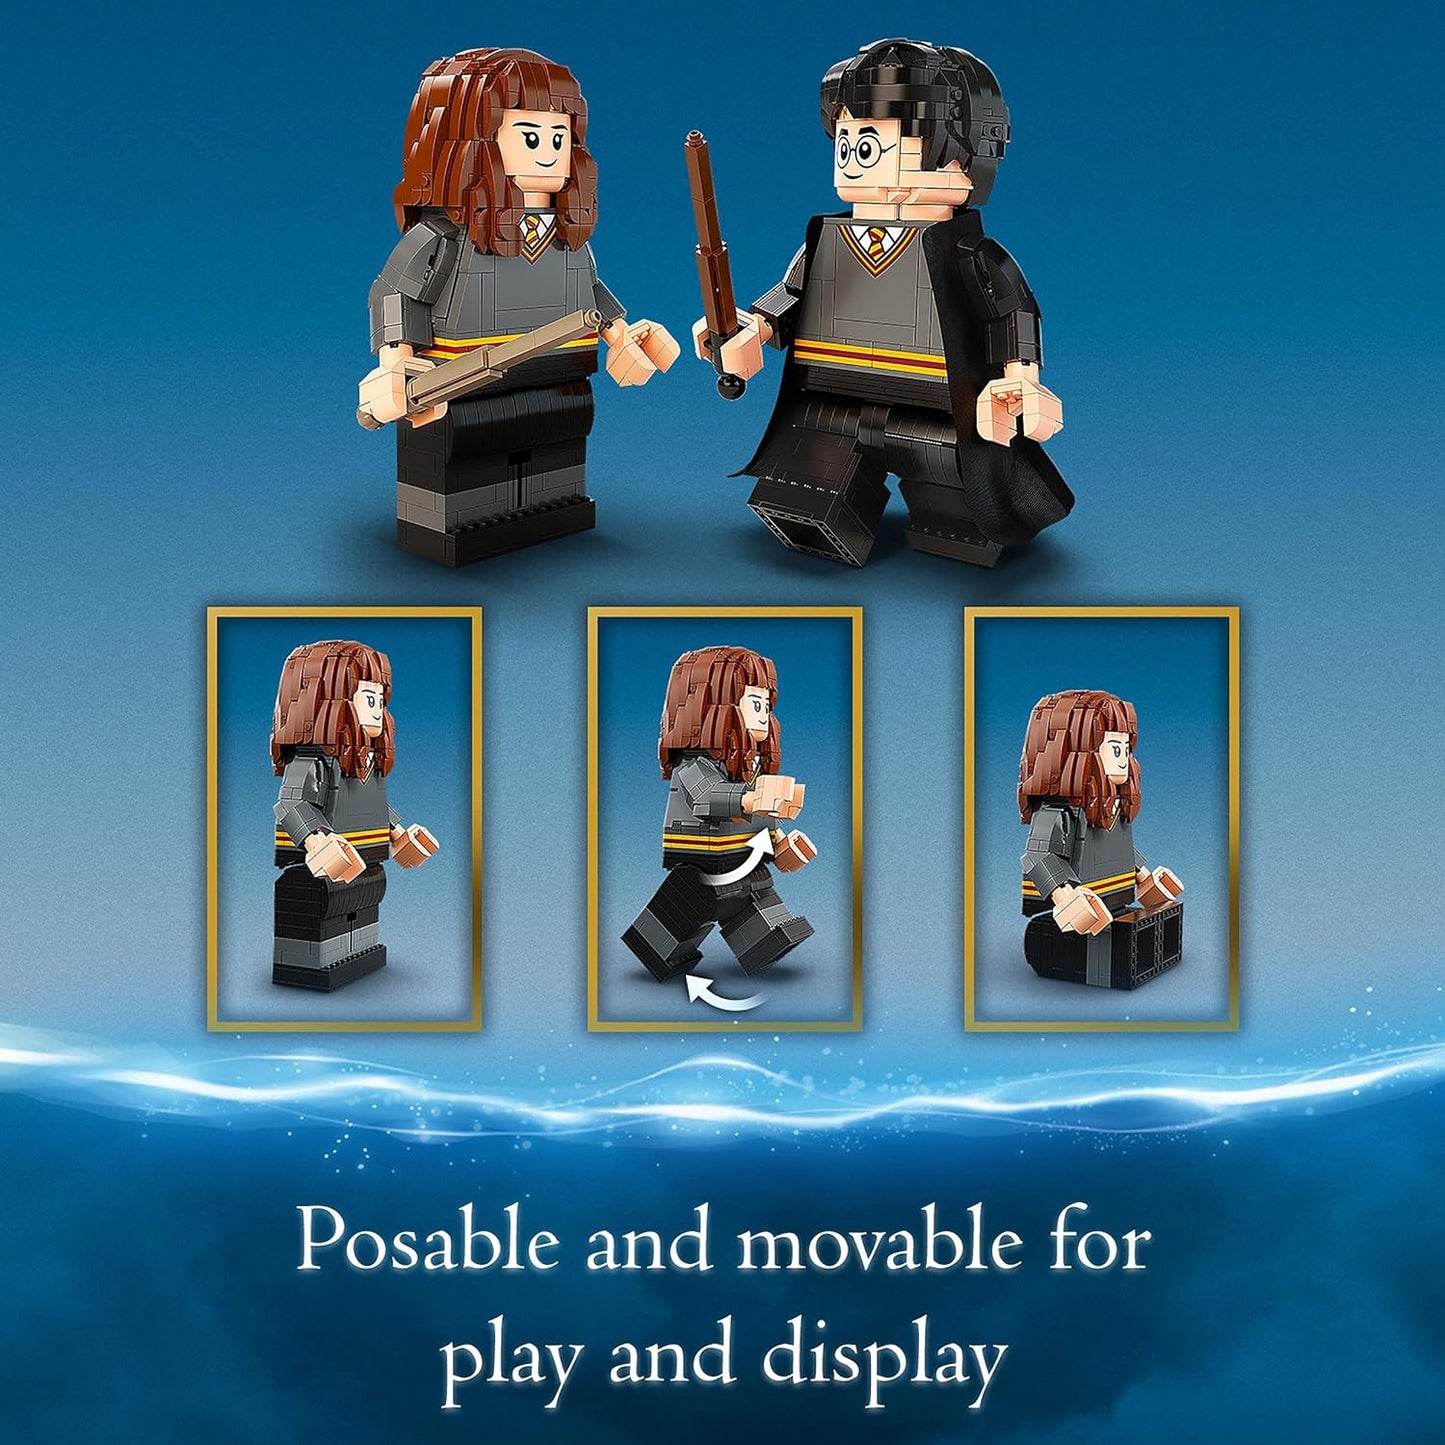 Lego Wizarding World Iconic Brick-Built Harry & Hermione 76393 Building Set for ages 10+ years